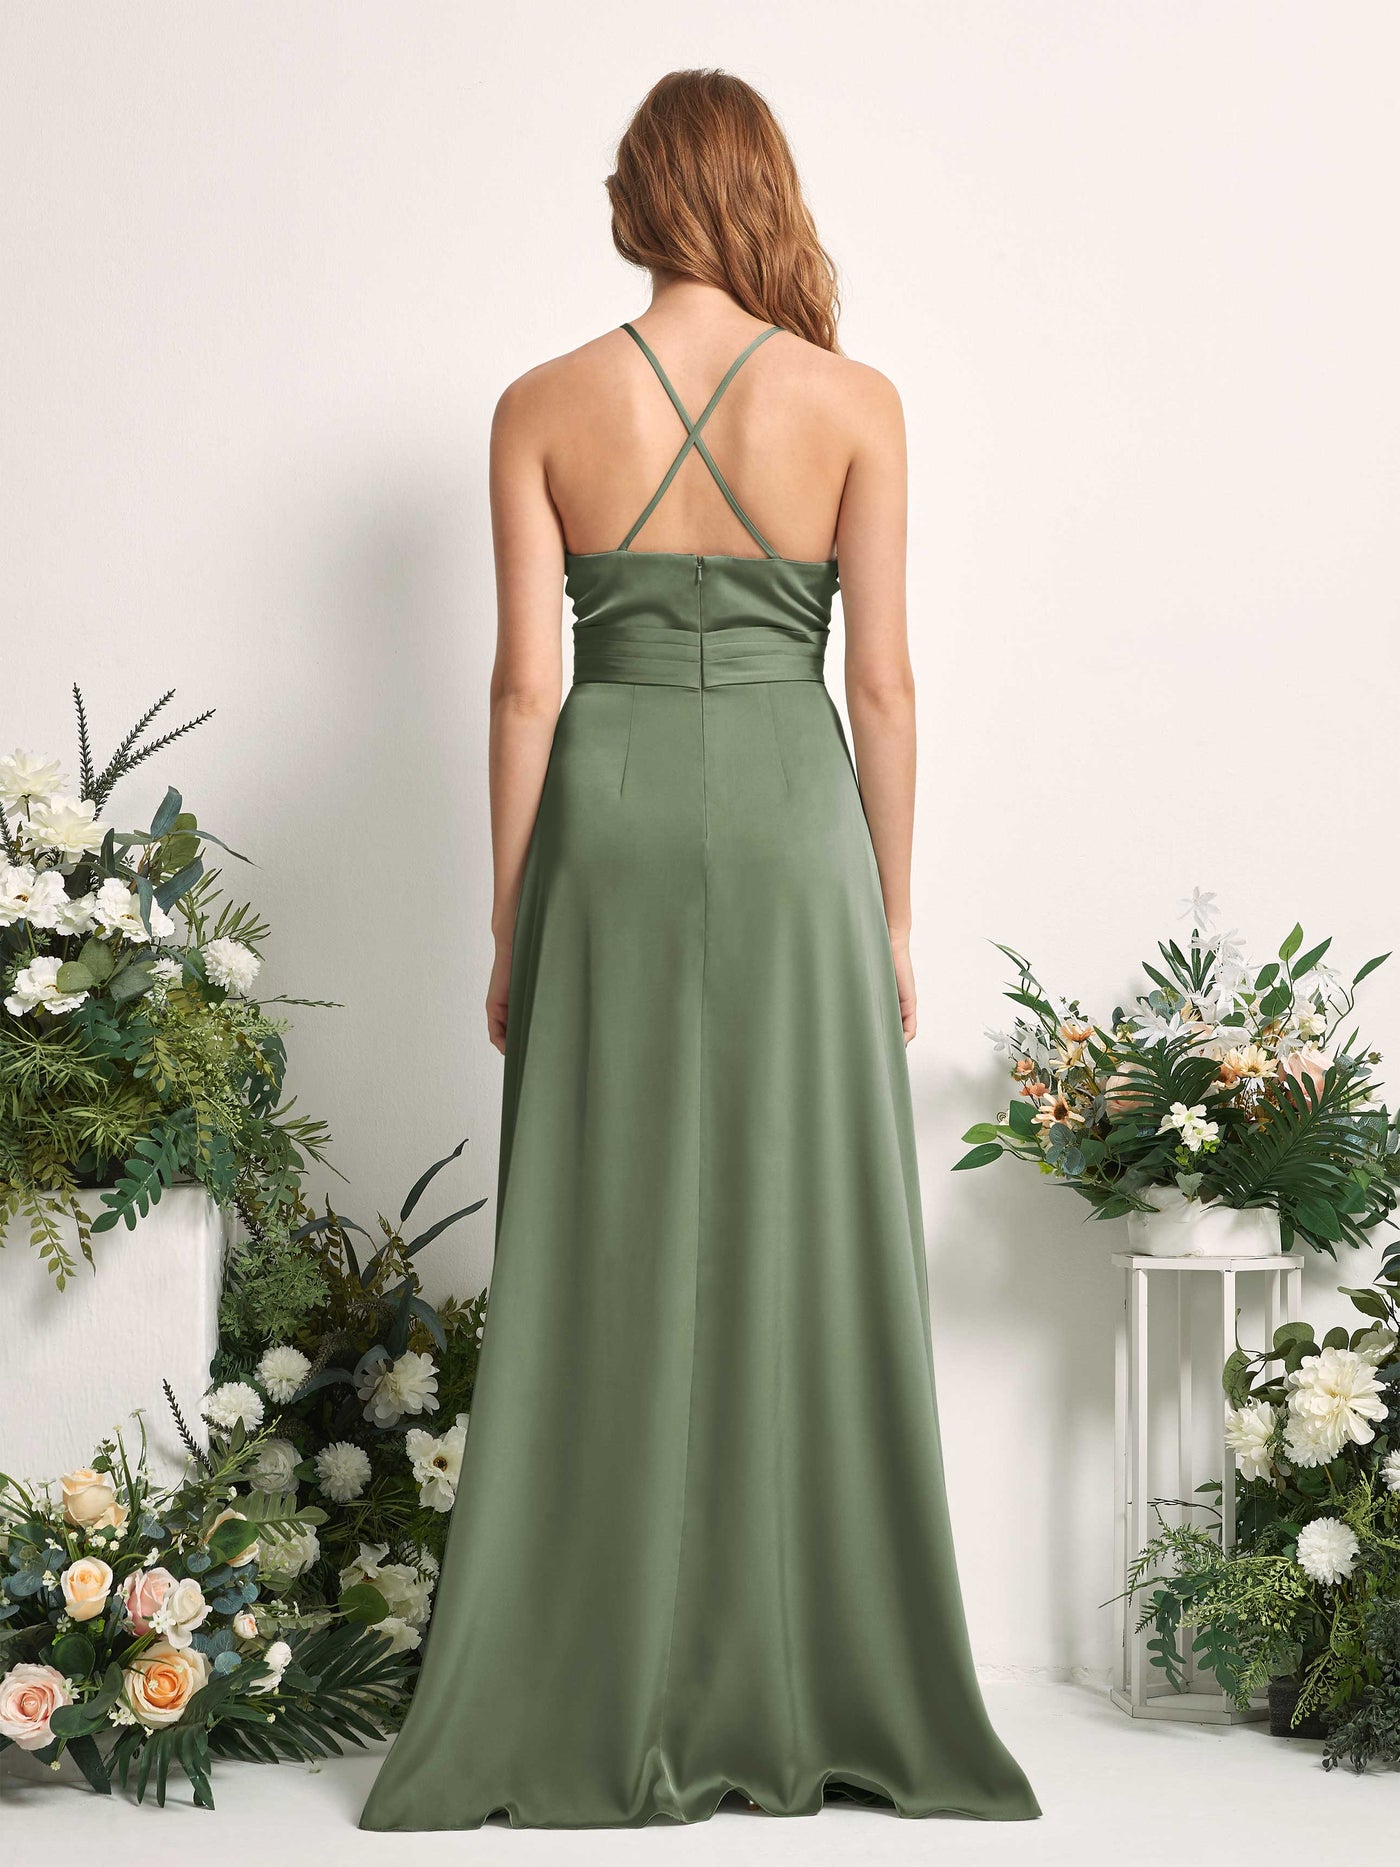 Green Olive Bridesmaid Dresses Bridesmaid Dress A-line Satin Spaghetti-straps Full Length Sleeveless Wedding Party Dress (80225770)#color_green-olive